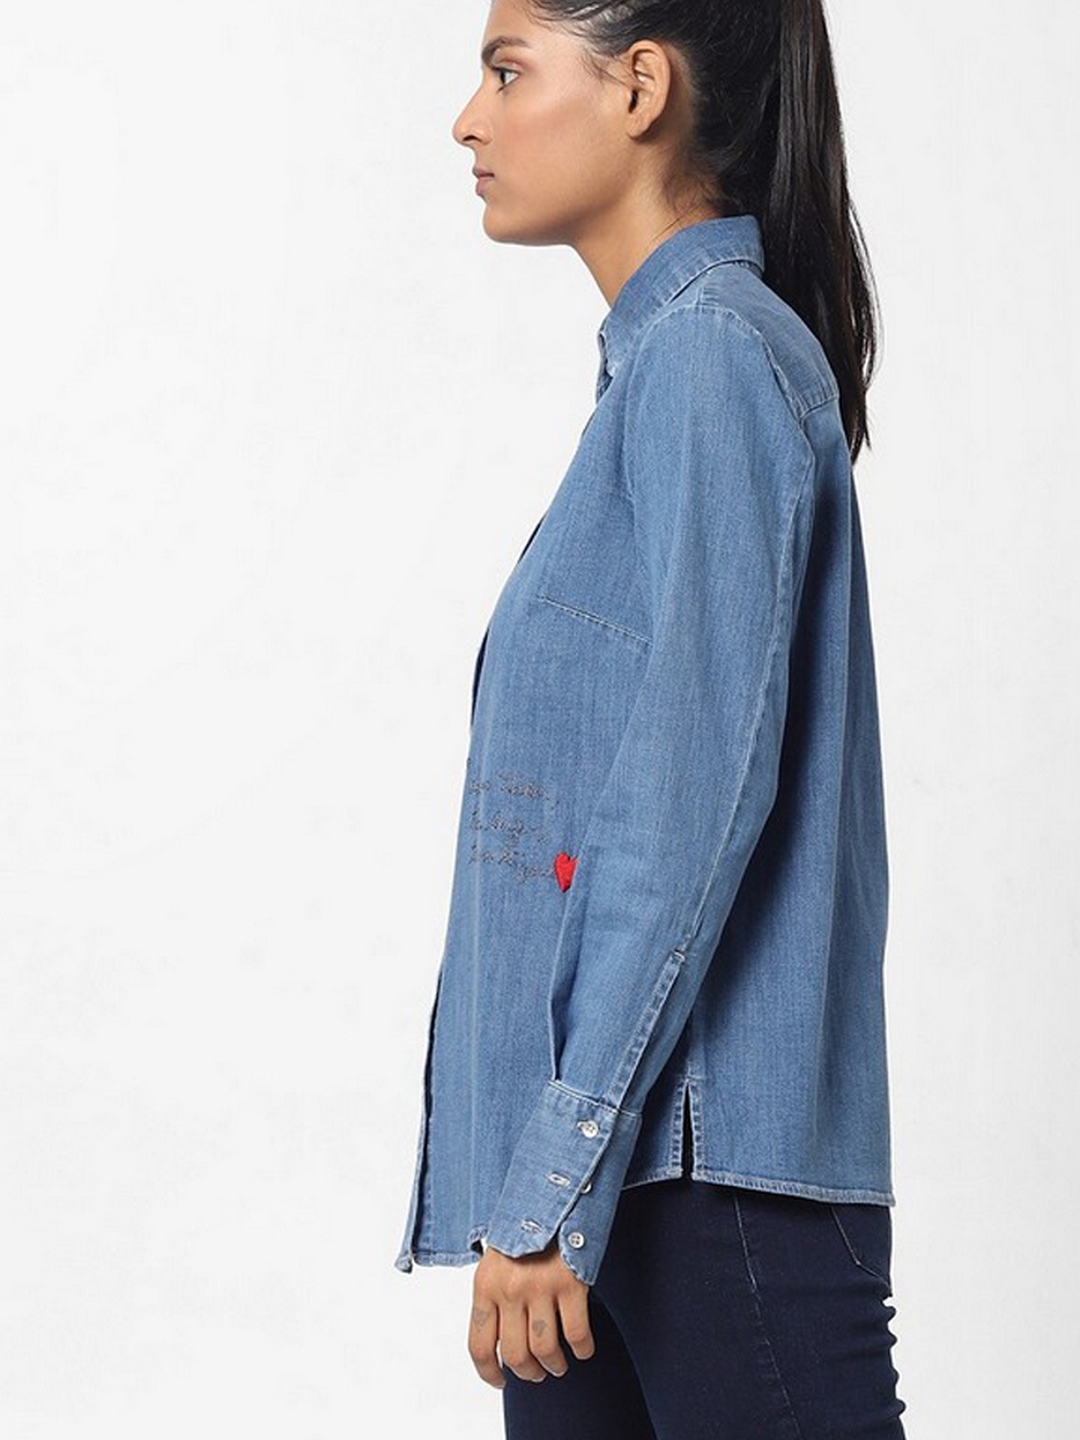 Maribel X Song Denim Shirt with Embroidery